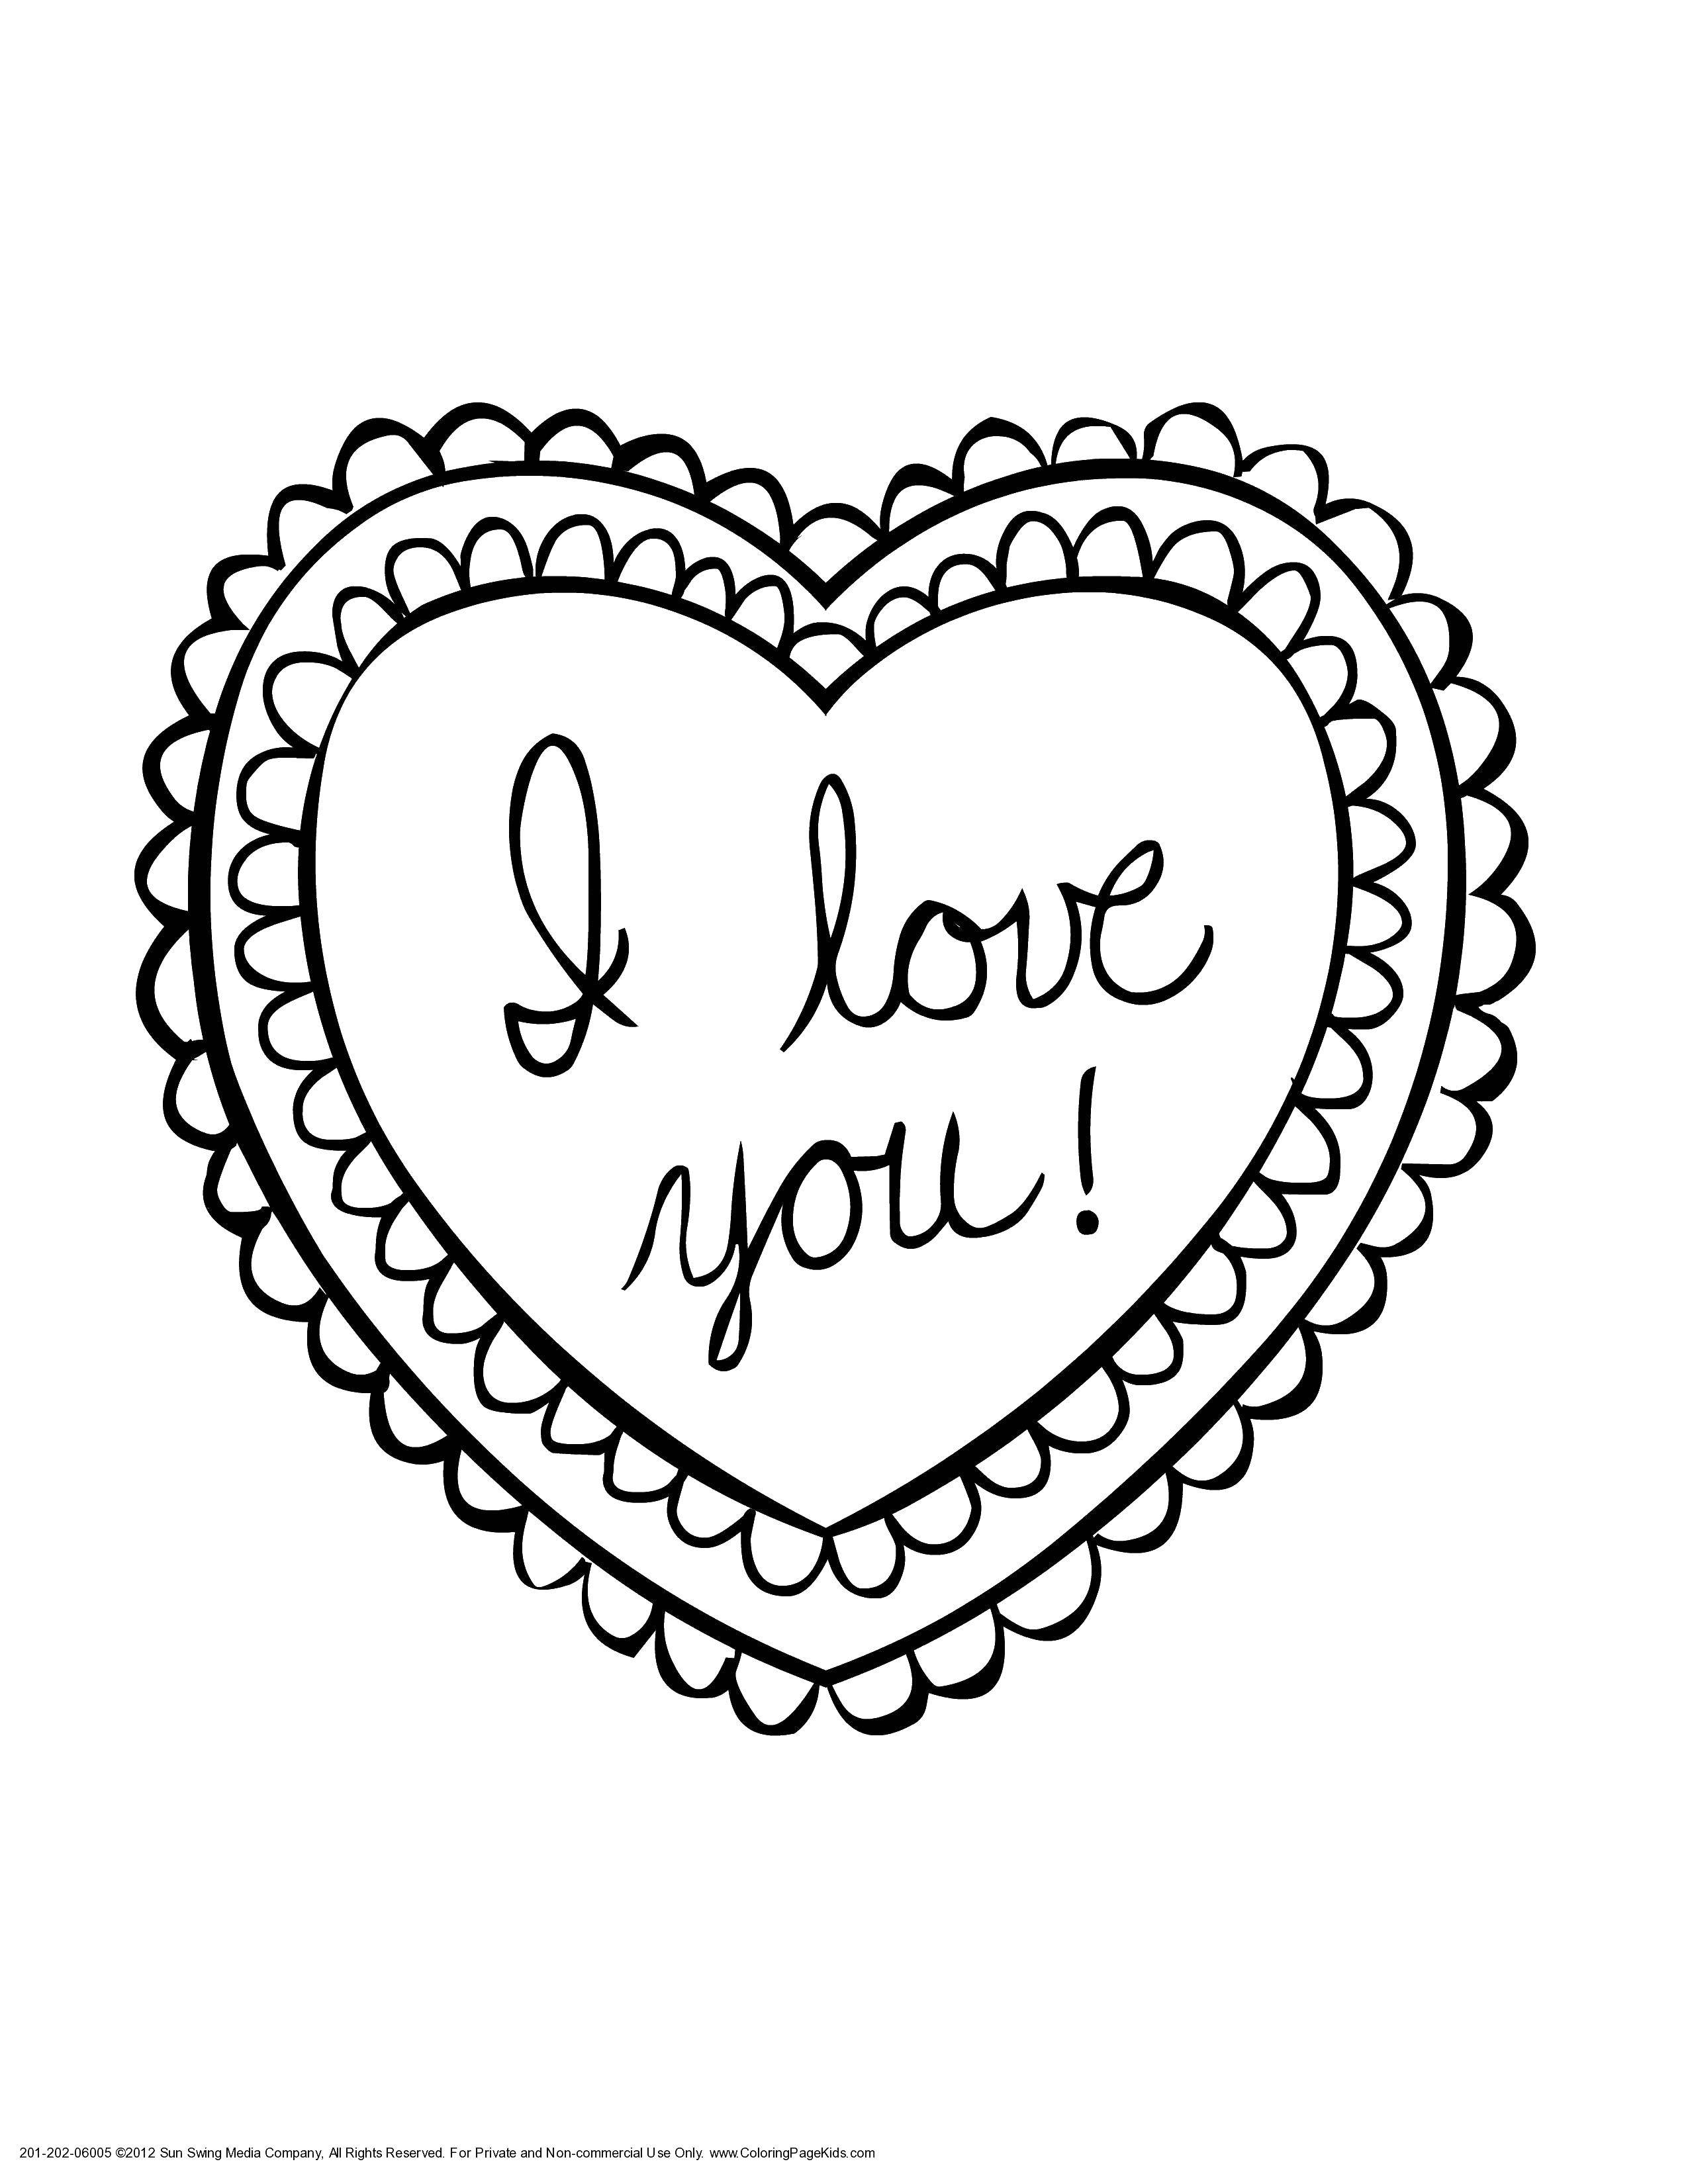 Coloring I love you. Category I love you. Tags:  I love you.